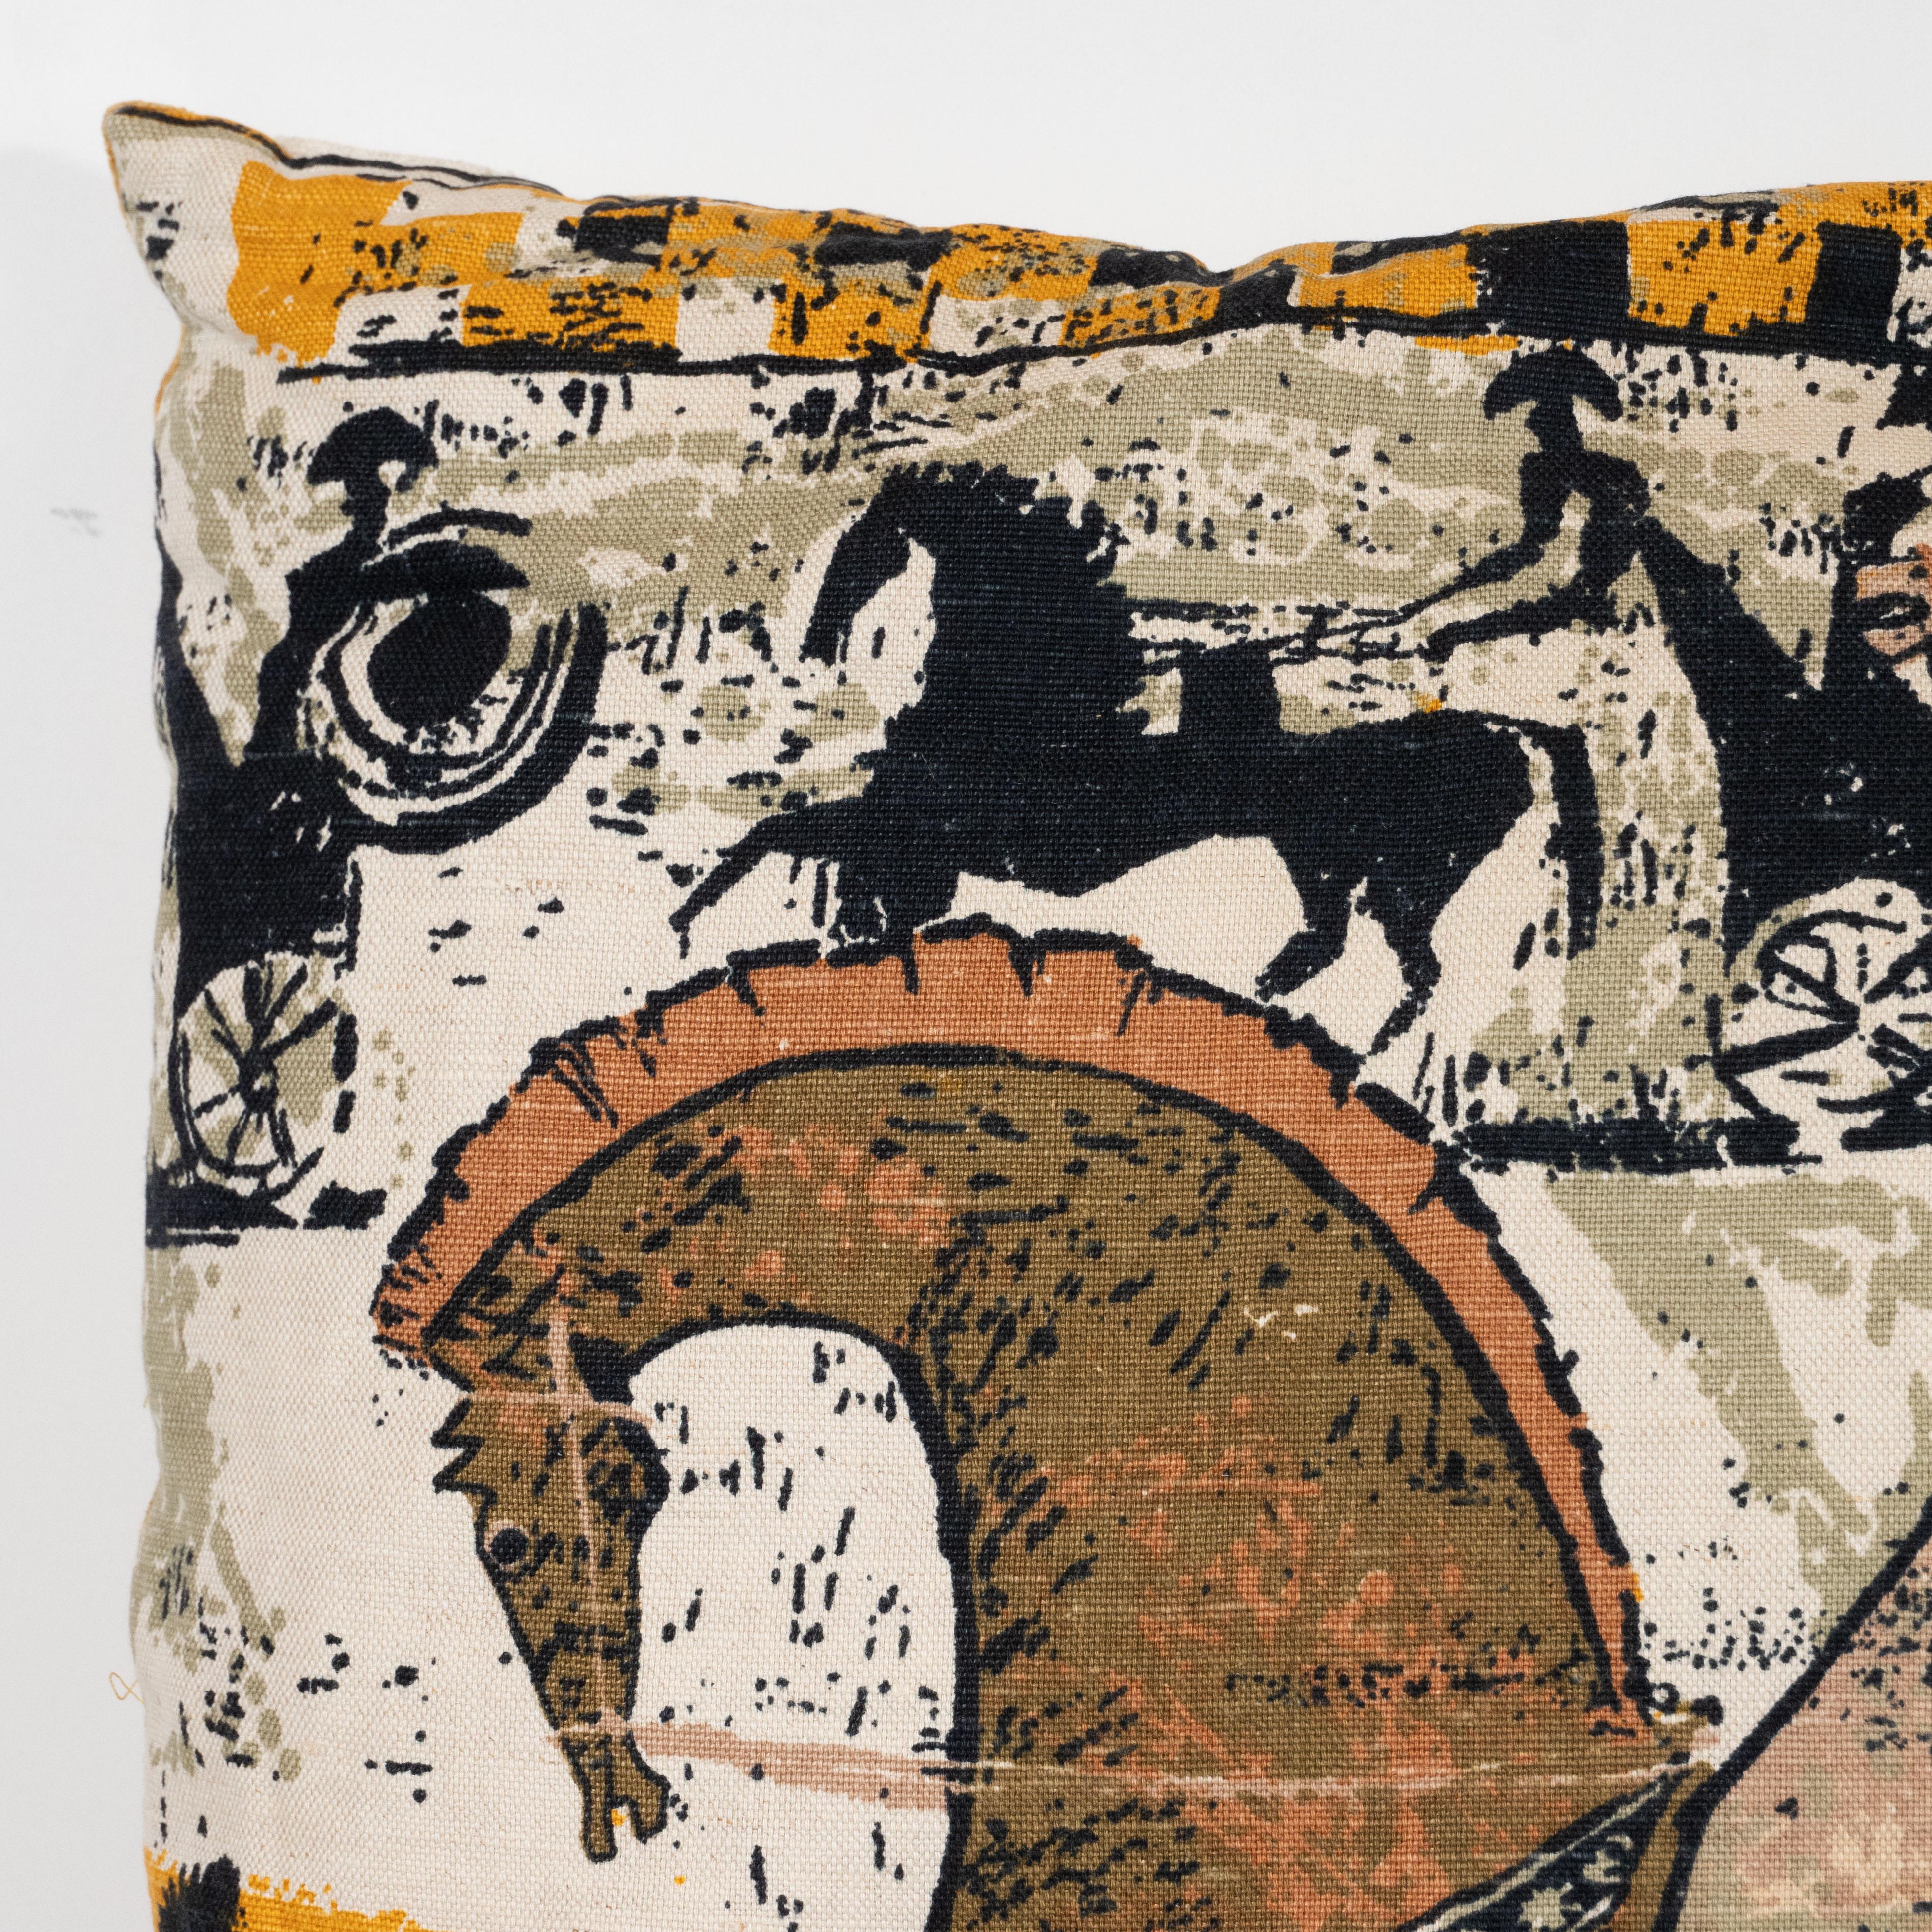 This graphic and rare pair of pillows were realized with Charles Eames original Etruscan print fabric depicting a stylized team of stallions, as well as the silhouette of a single horse pulling a cart. Inspired by ancient Rome, this wonderful